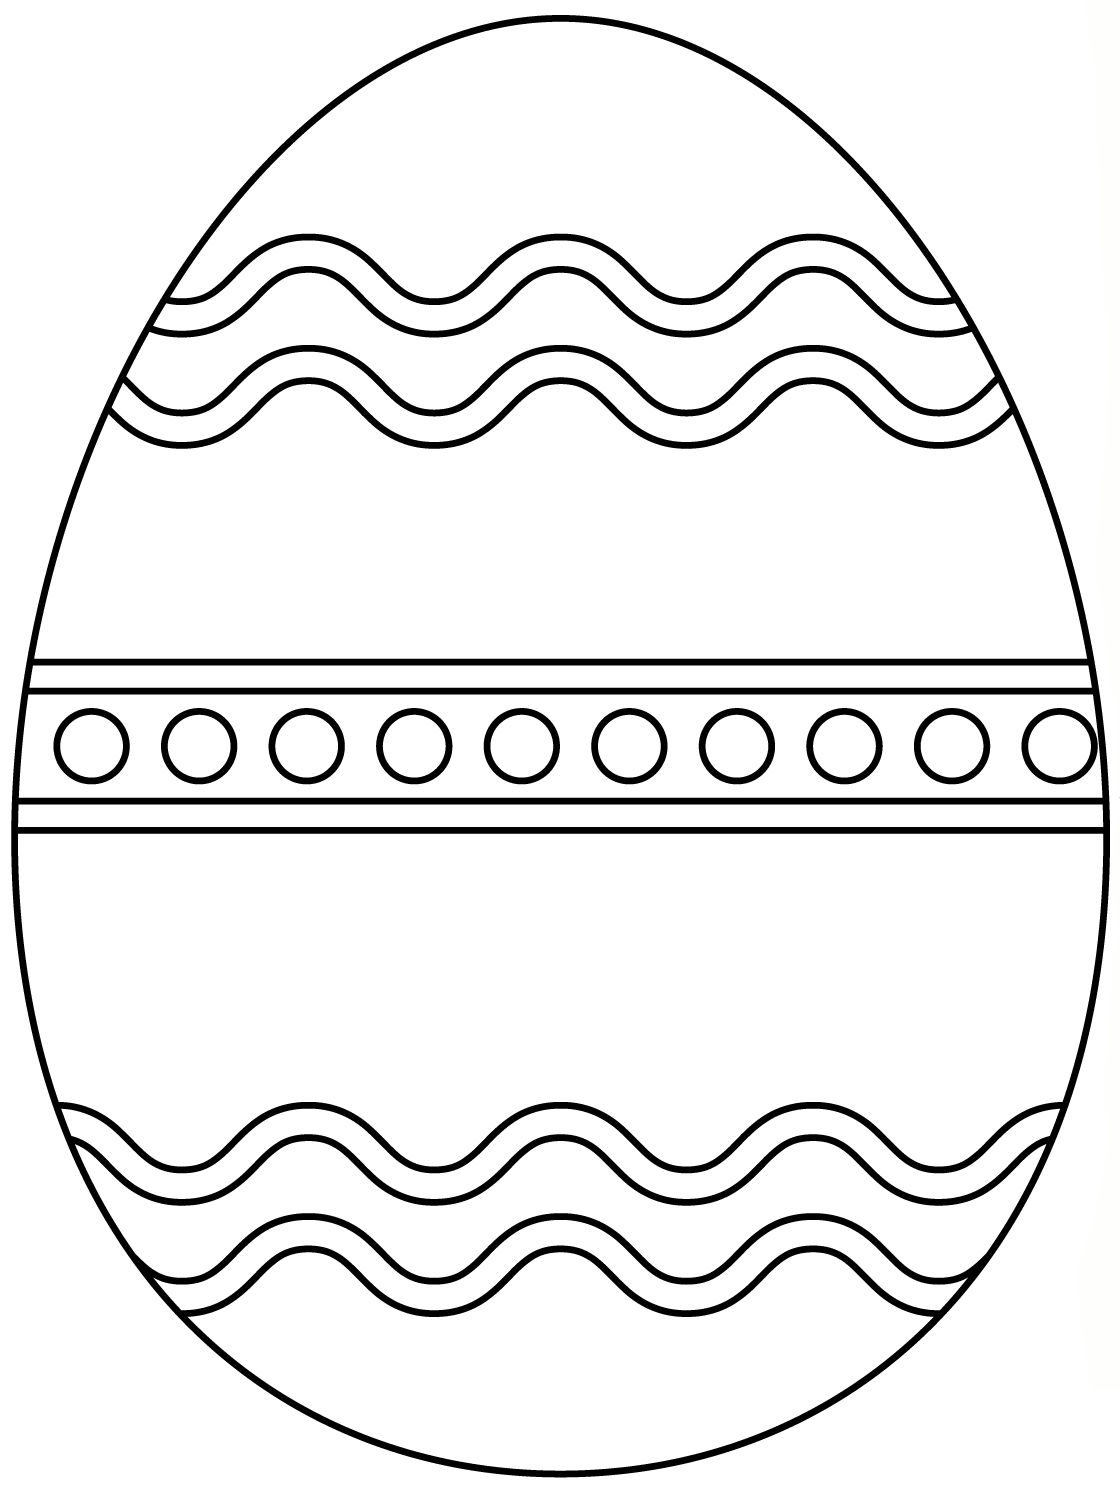 Easter Egg With Abstract Pattern 3 1